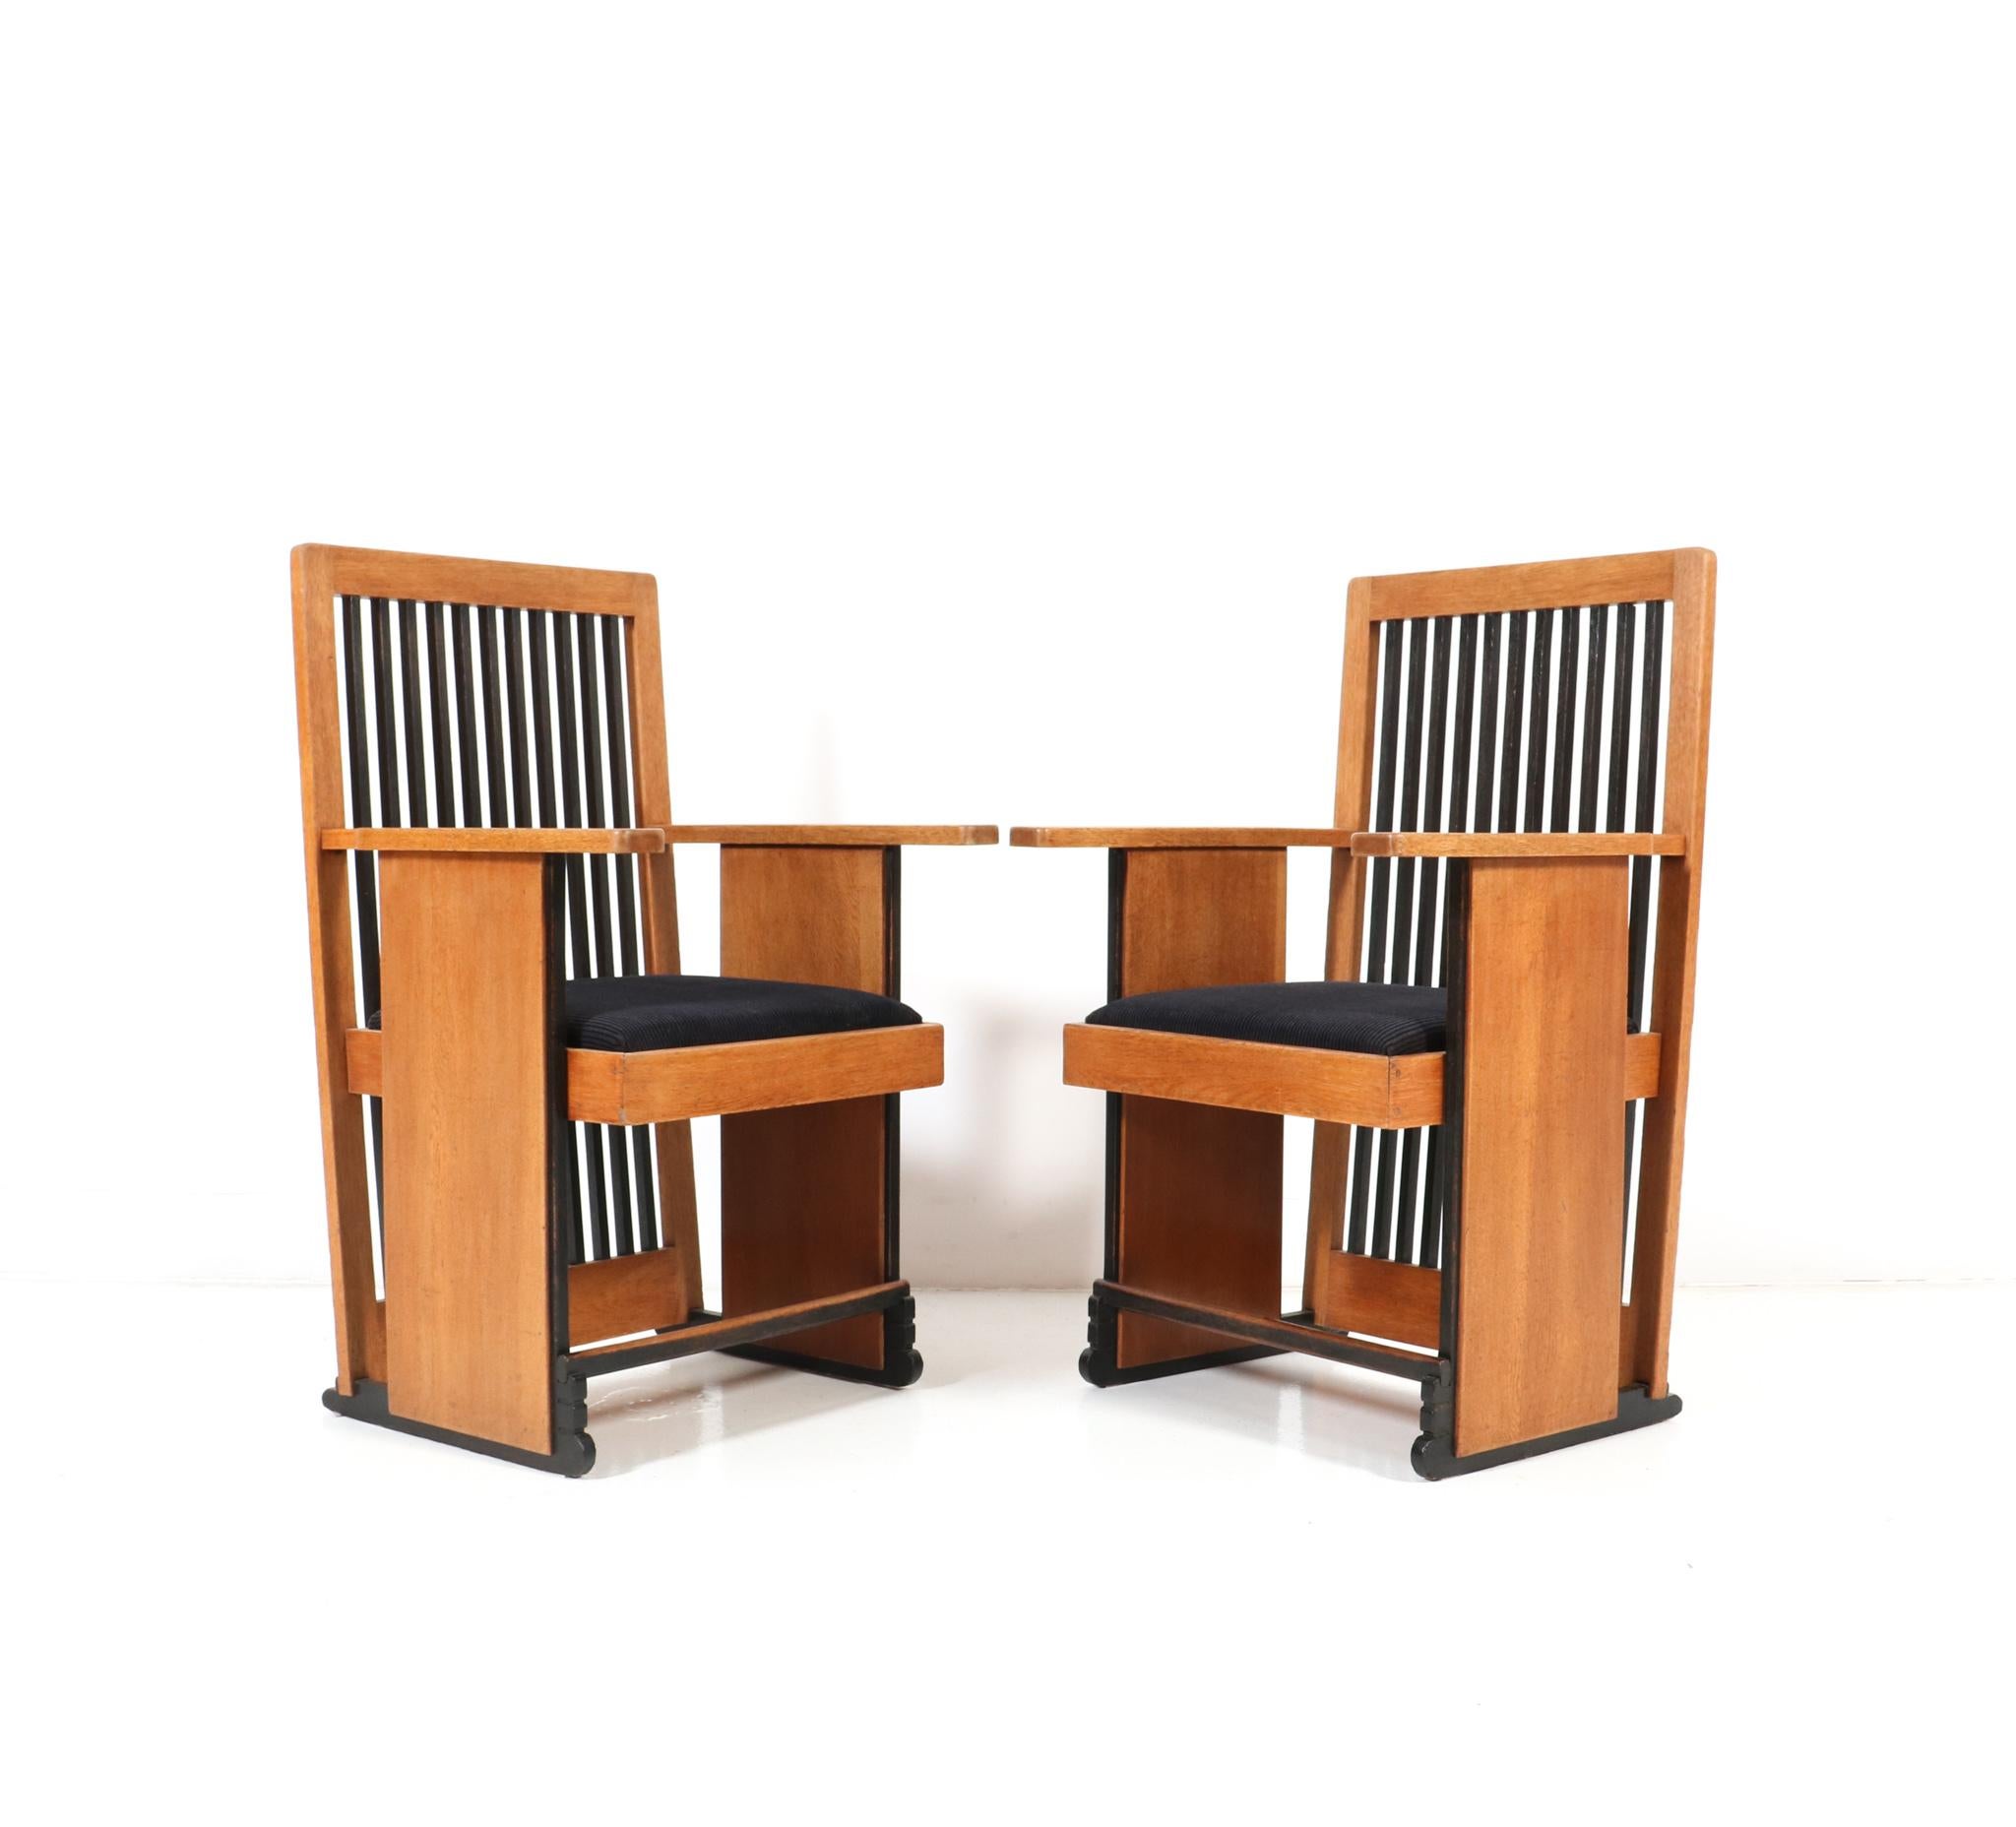 Early 20th Century  Oak Art Deco Modernist High Back Dining Room Chairs by Architect Caspers, 1920s For Sale